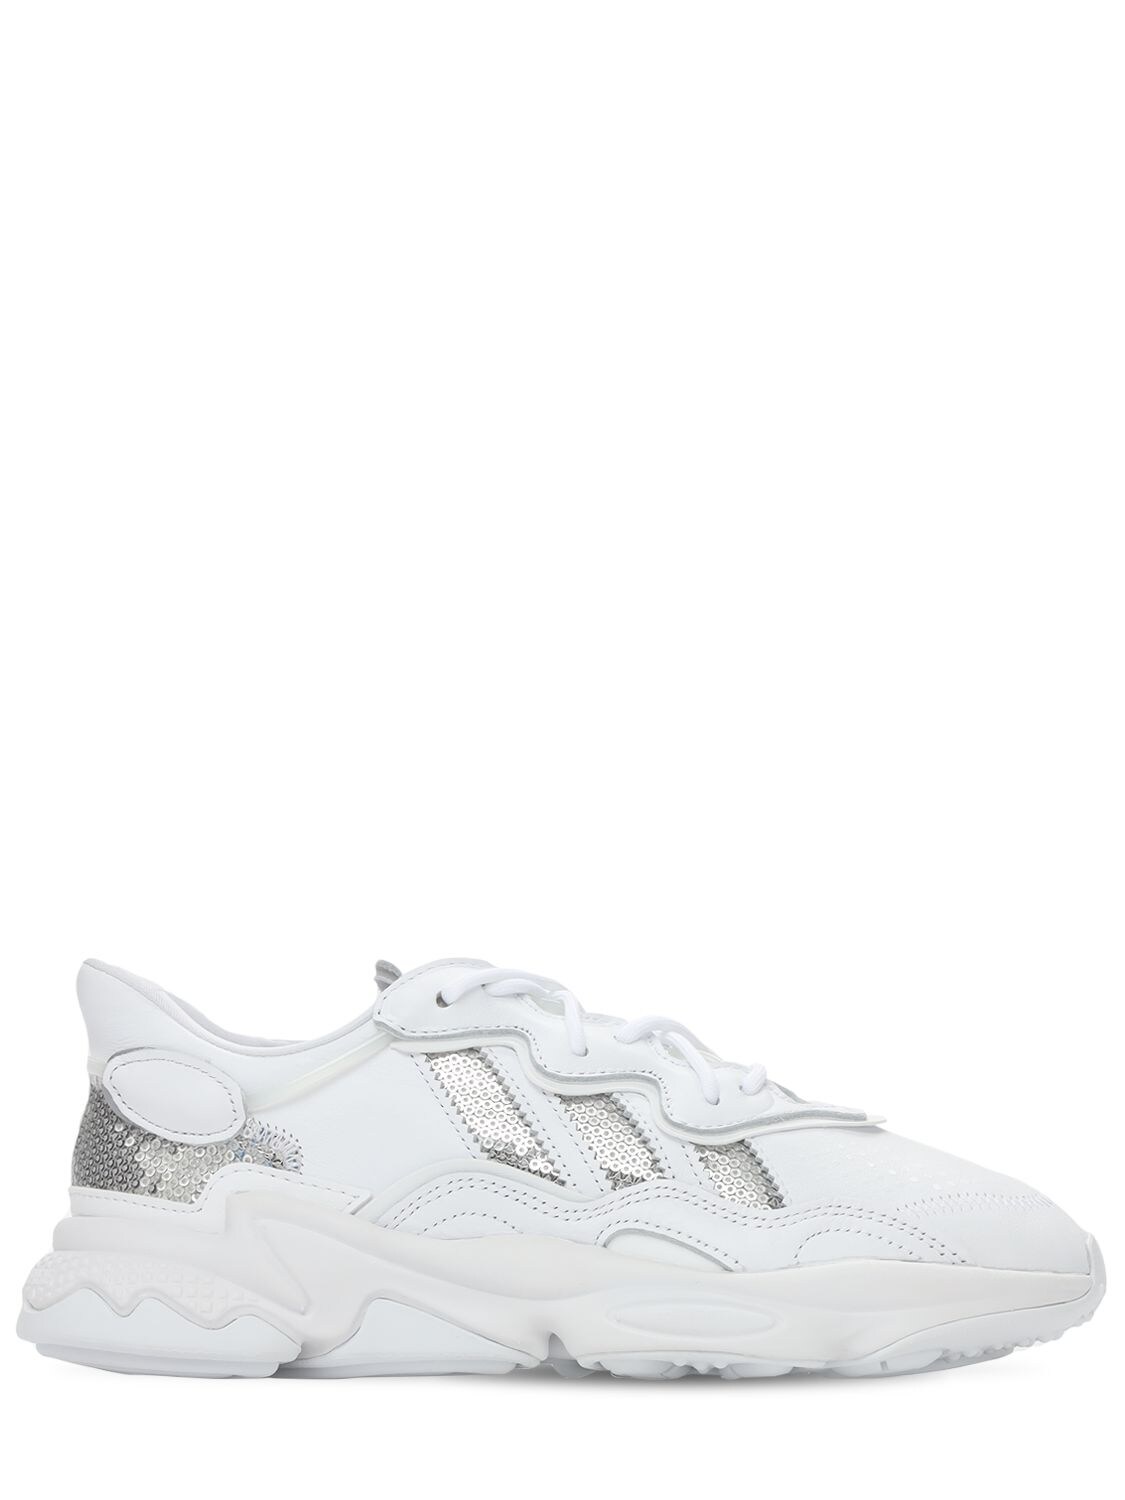 Adidas Originals Ozweego Sequined Sneakers In White,silver